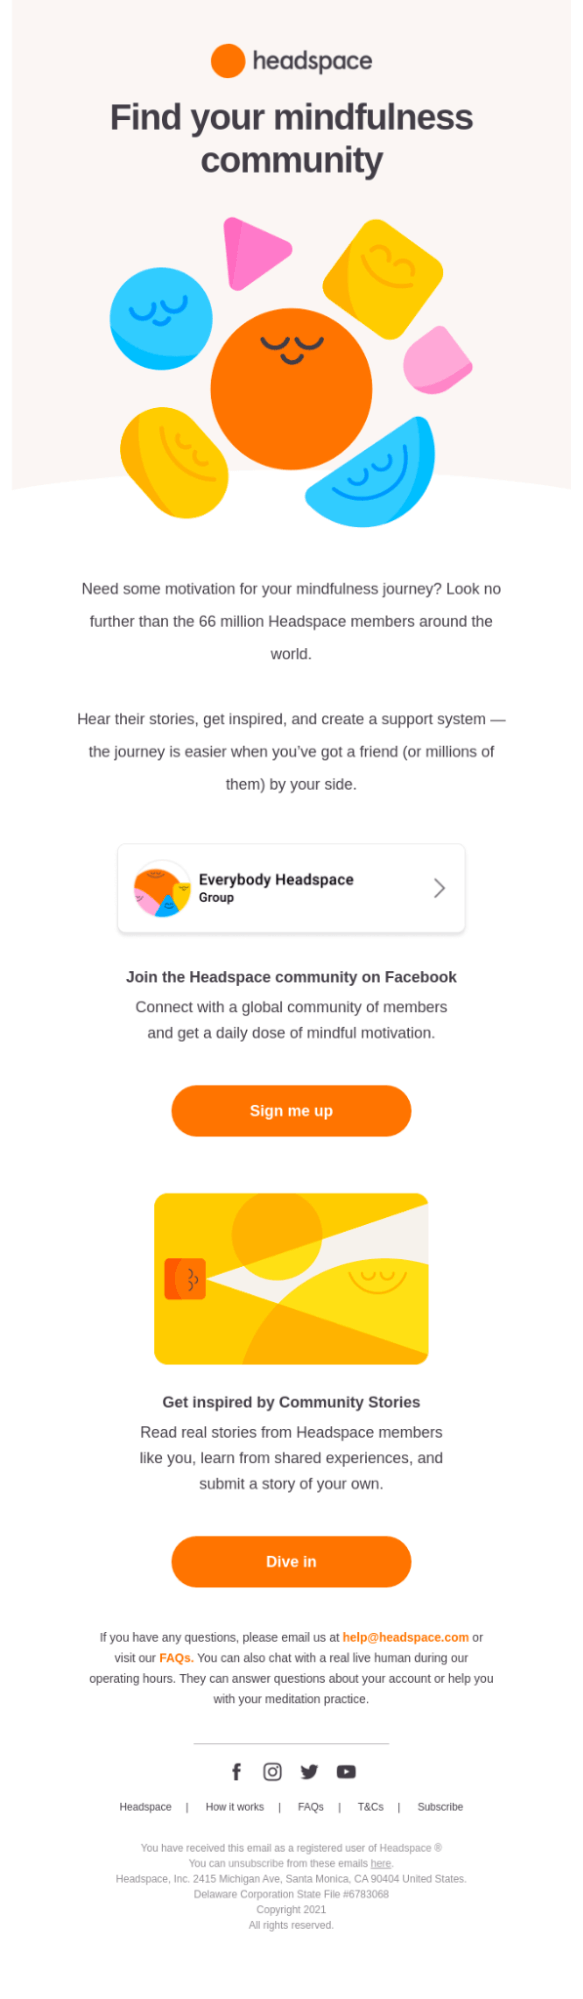 Email lead nurturing campaign by Headspace